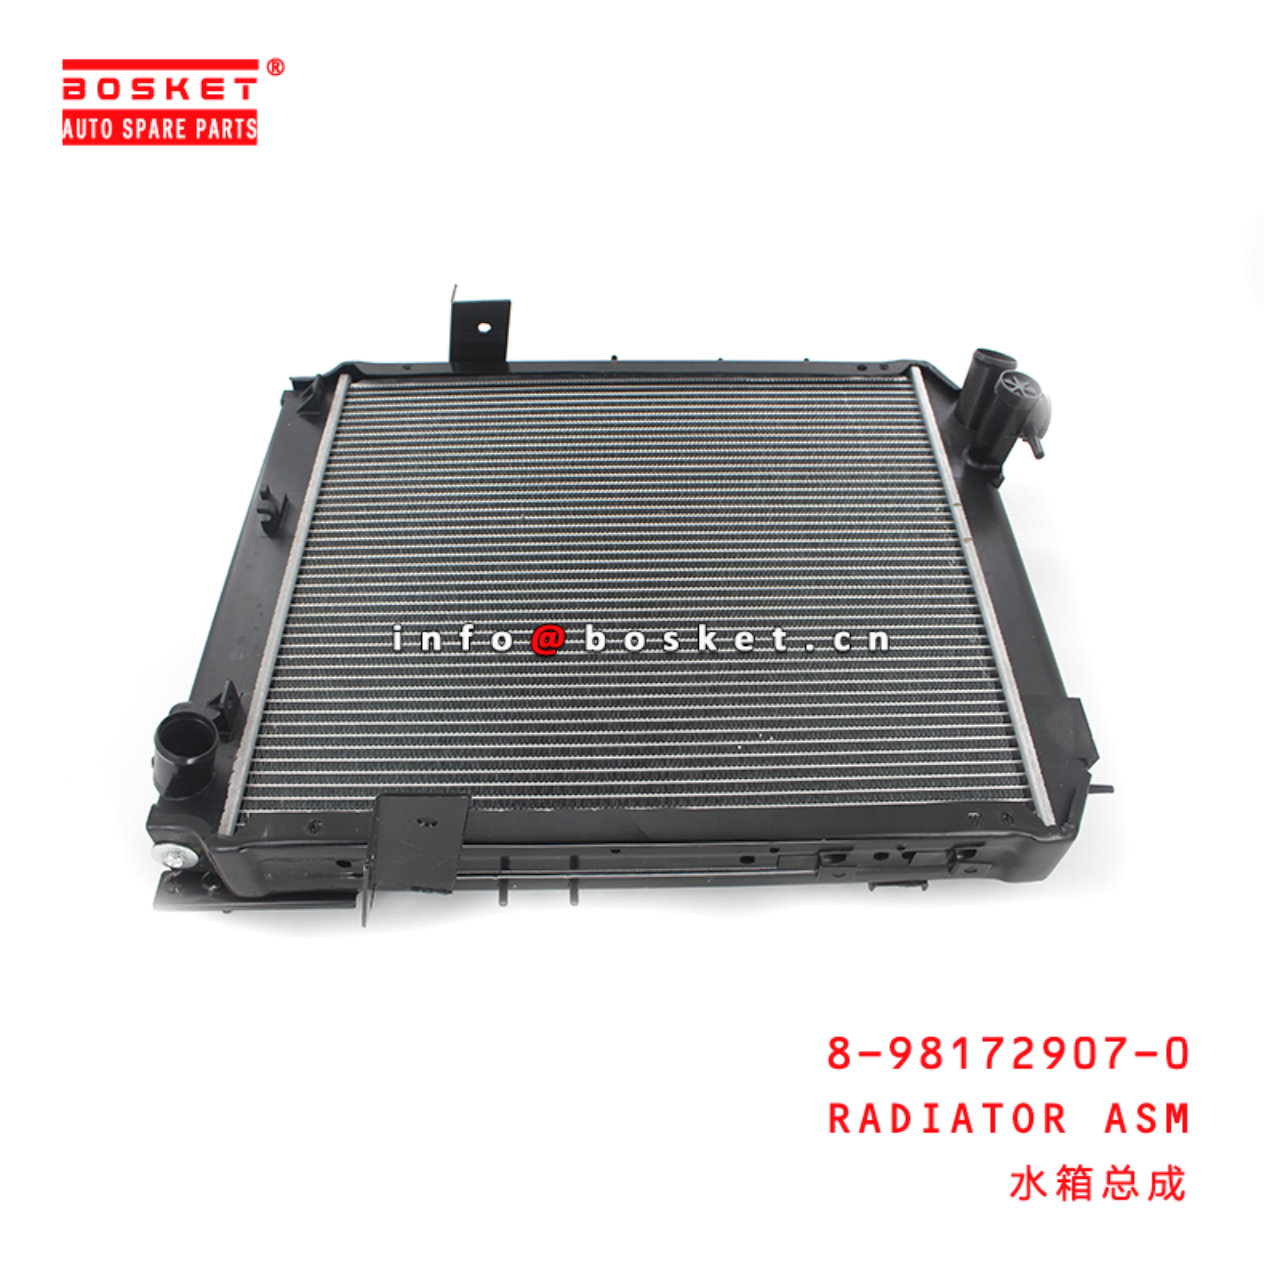 8-98172907-0 Radiator Assembly Suitable for ISUZU ...